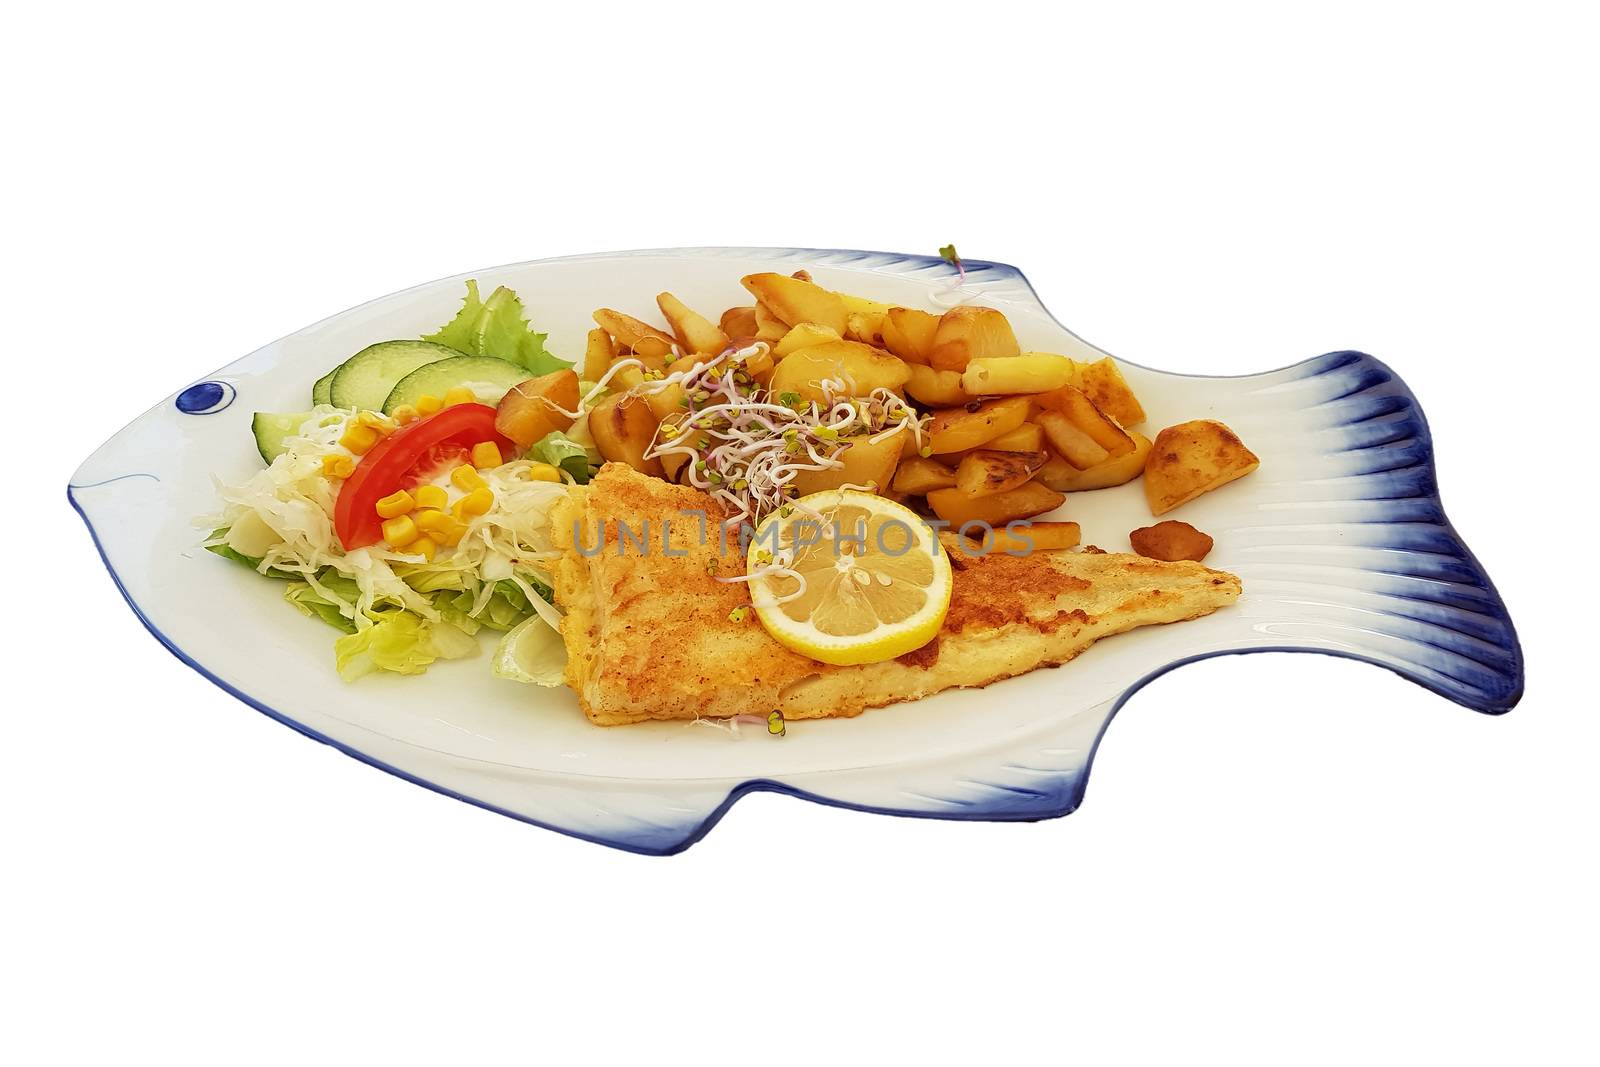 Fried fish on fish-shaped plate  by JFsPic